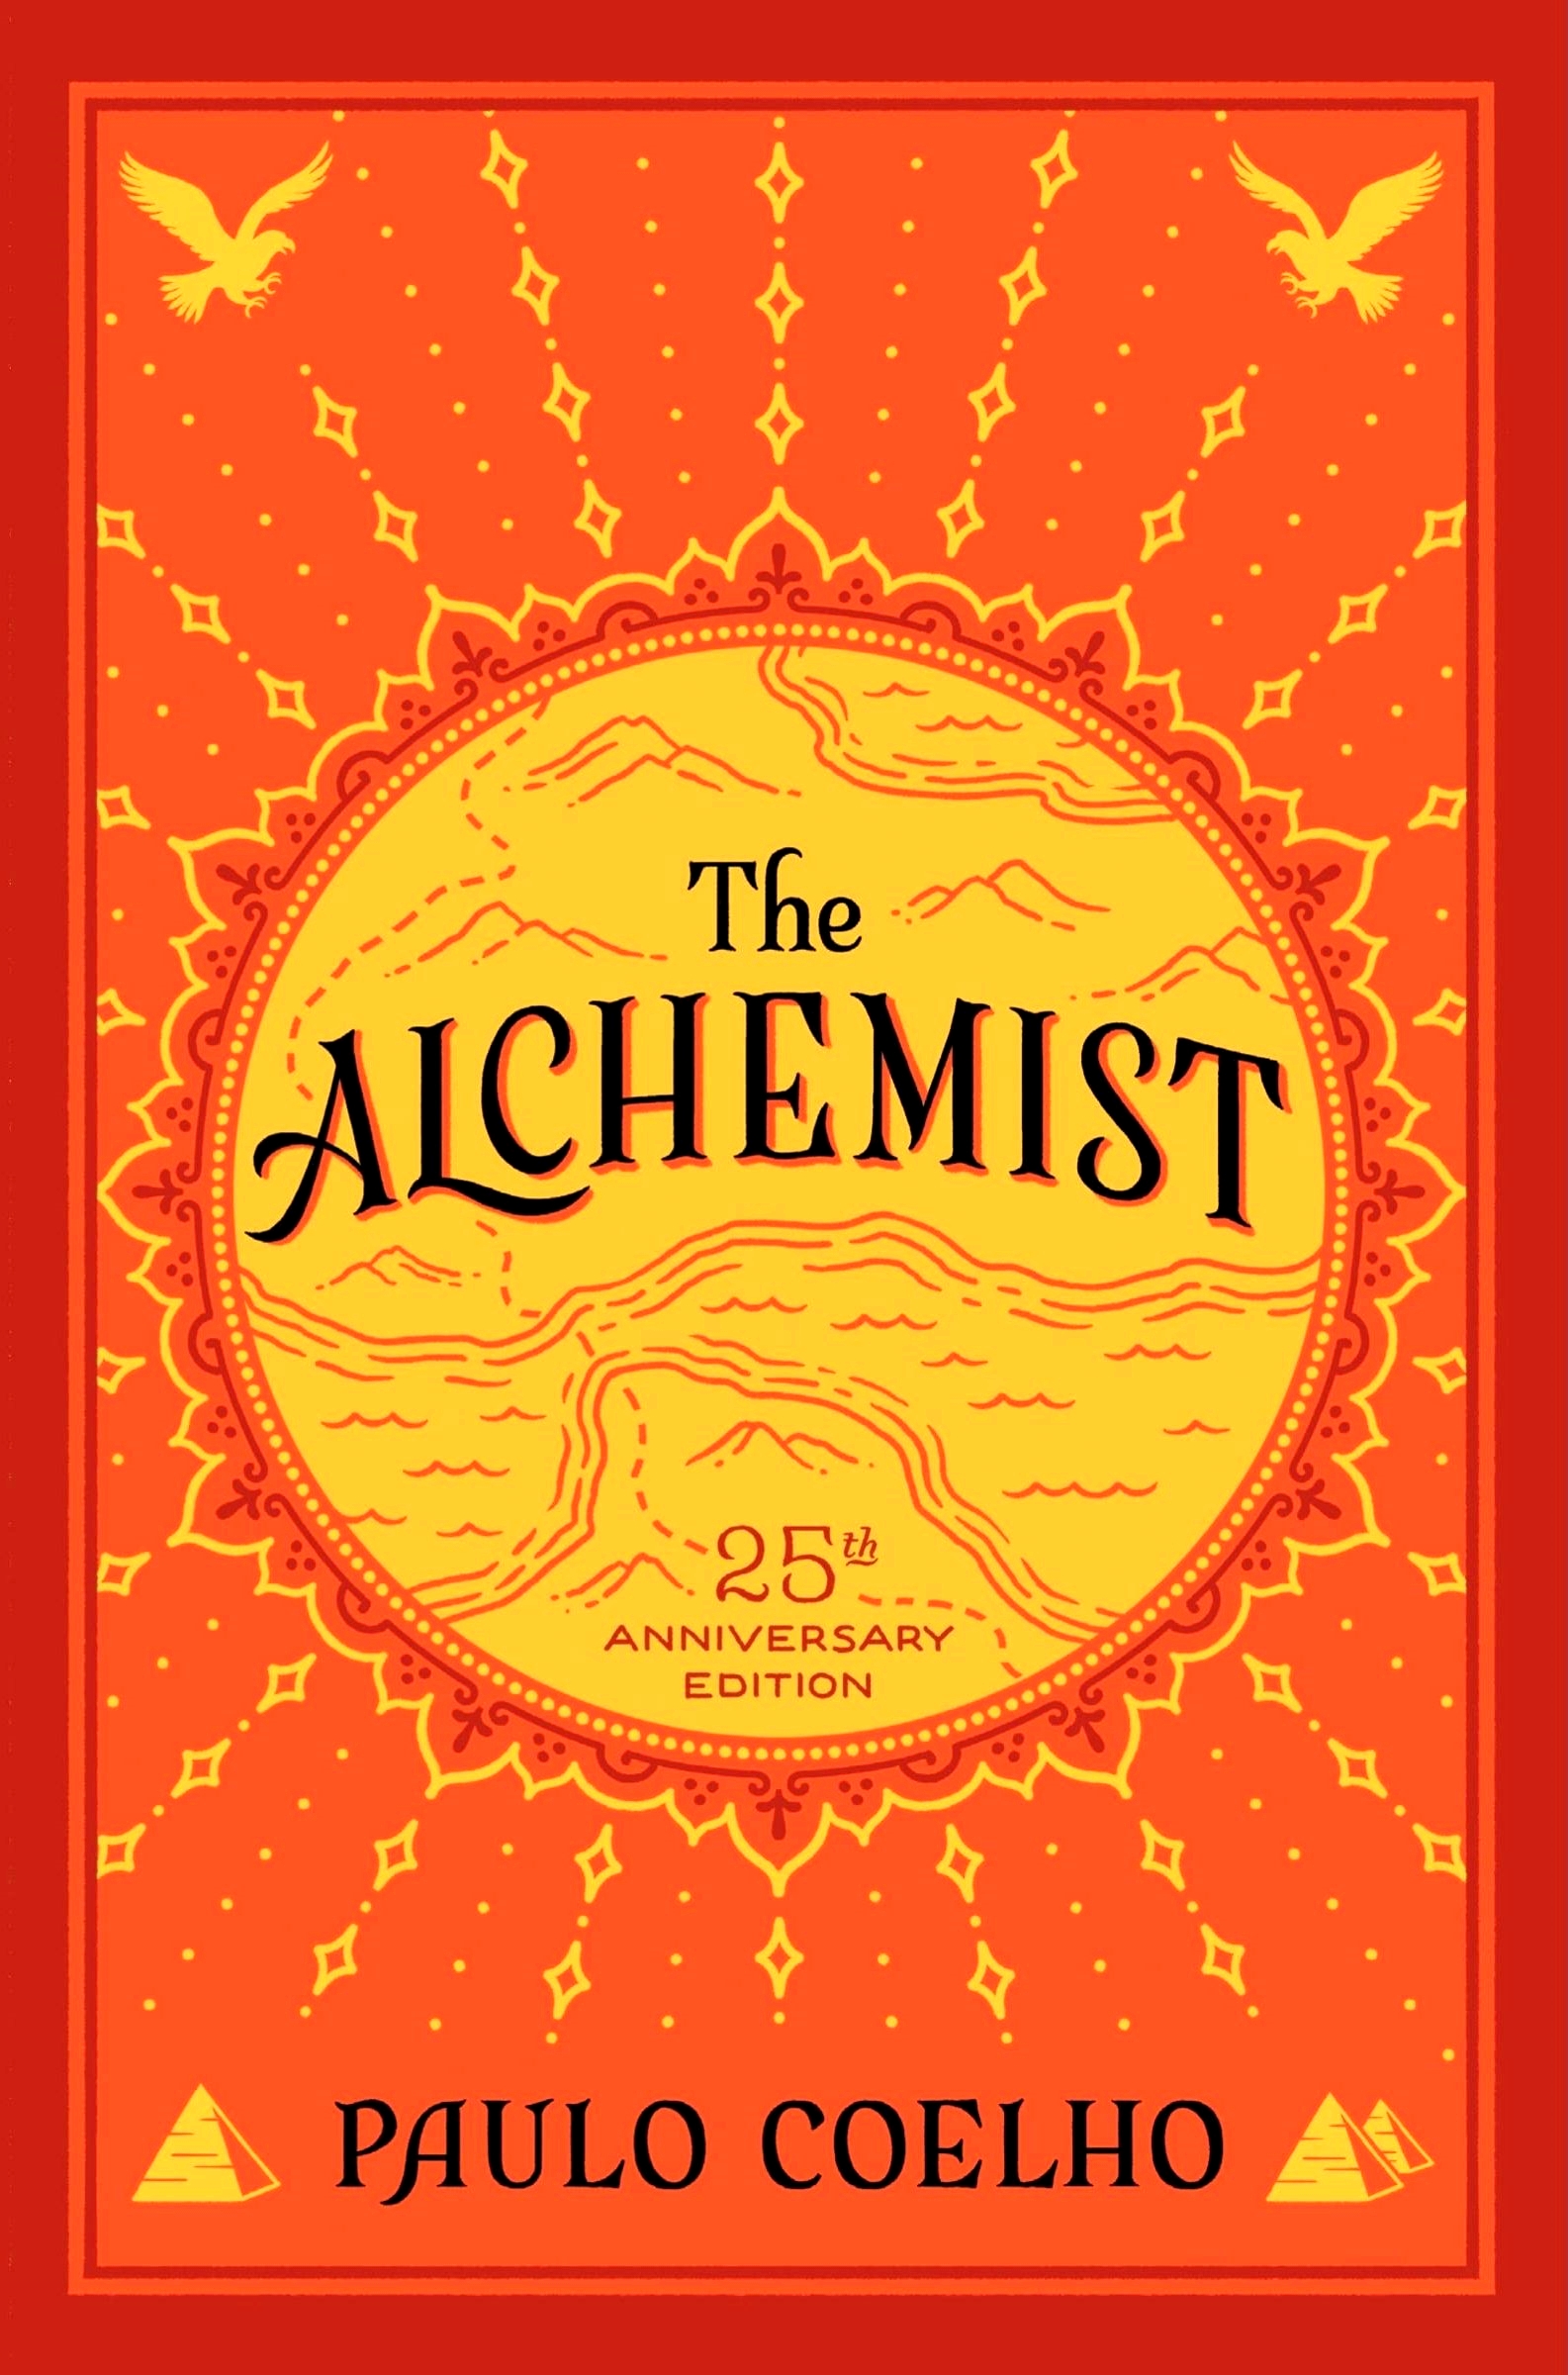 The alchemist-cover